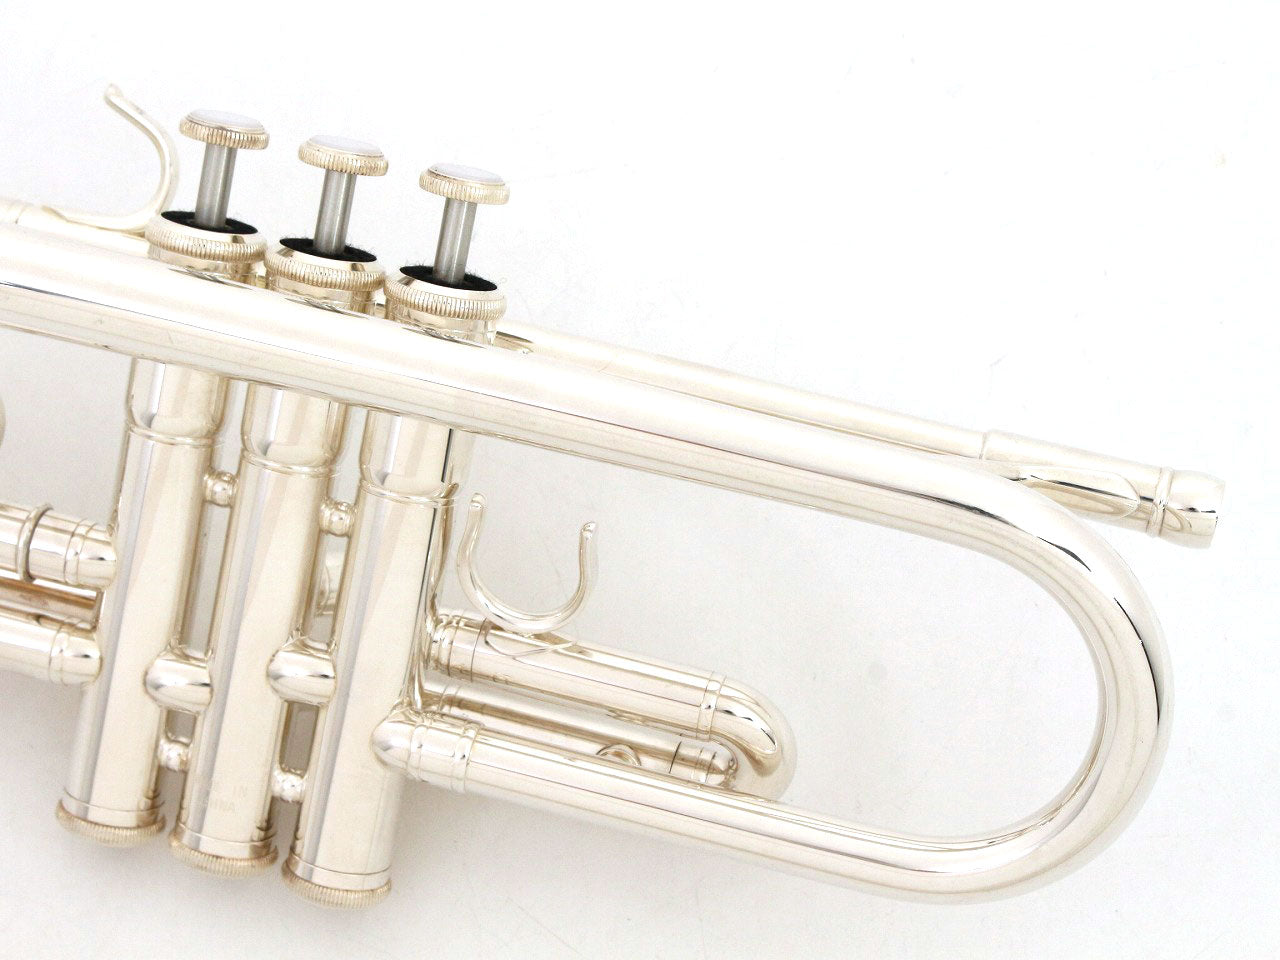 [SN 483345] USED YAMAHA / Trumpet YTR-4335GSII Silver plated finish [11]